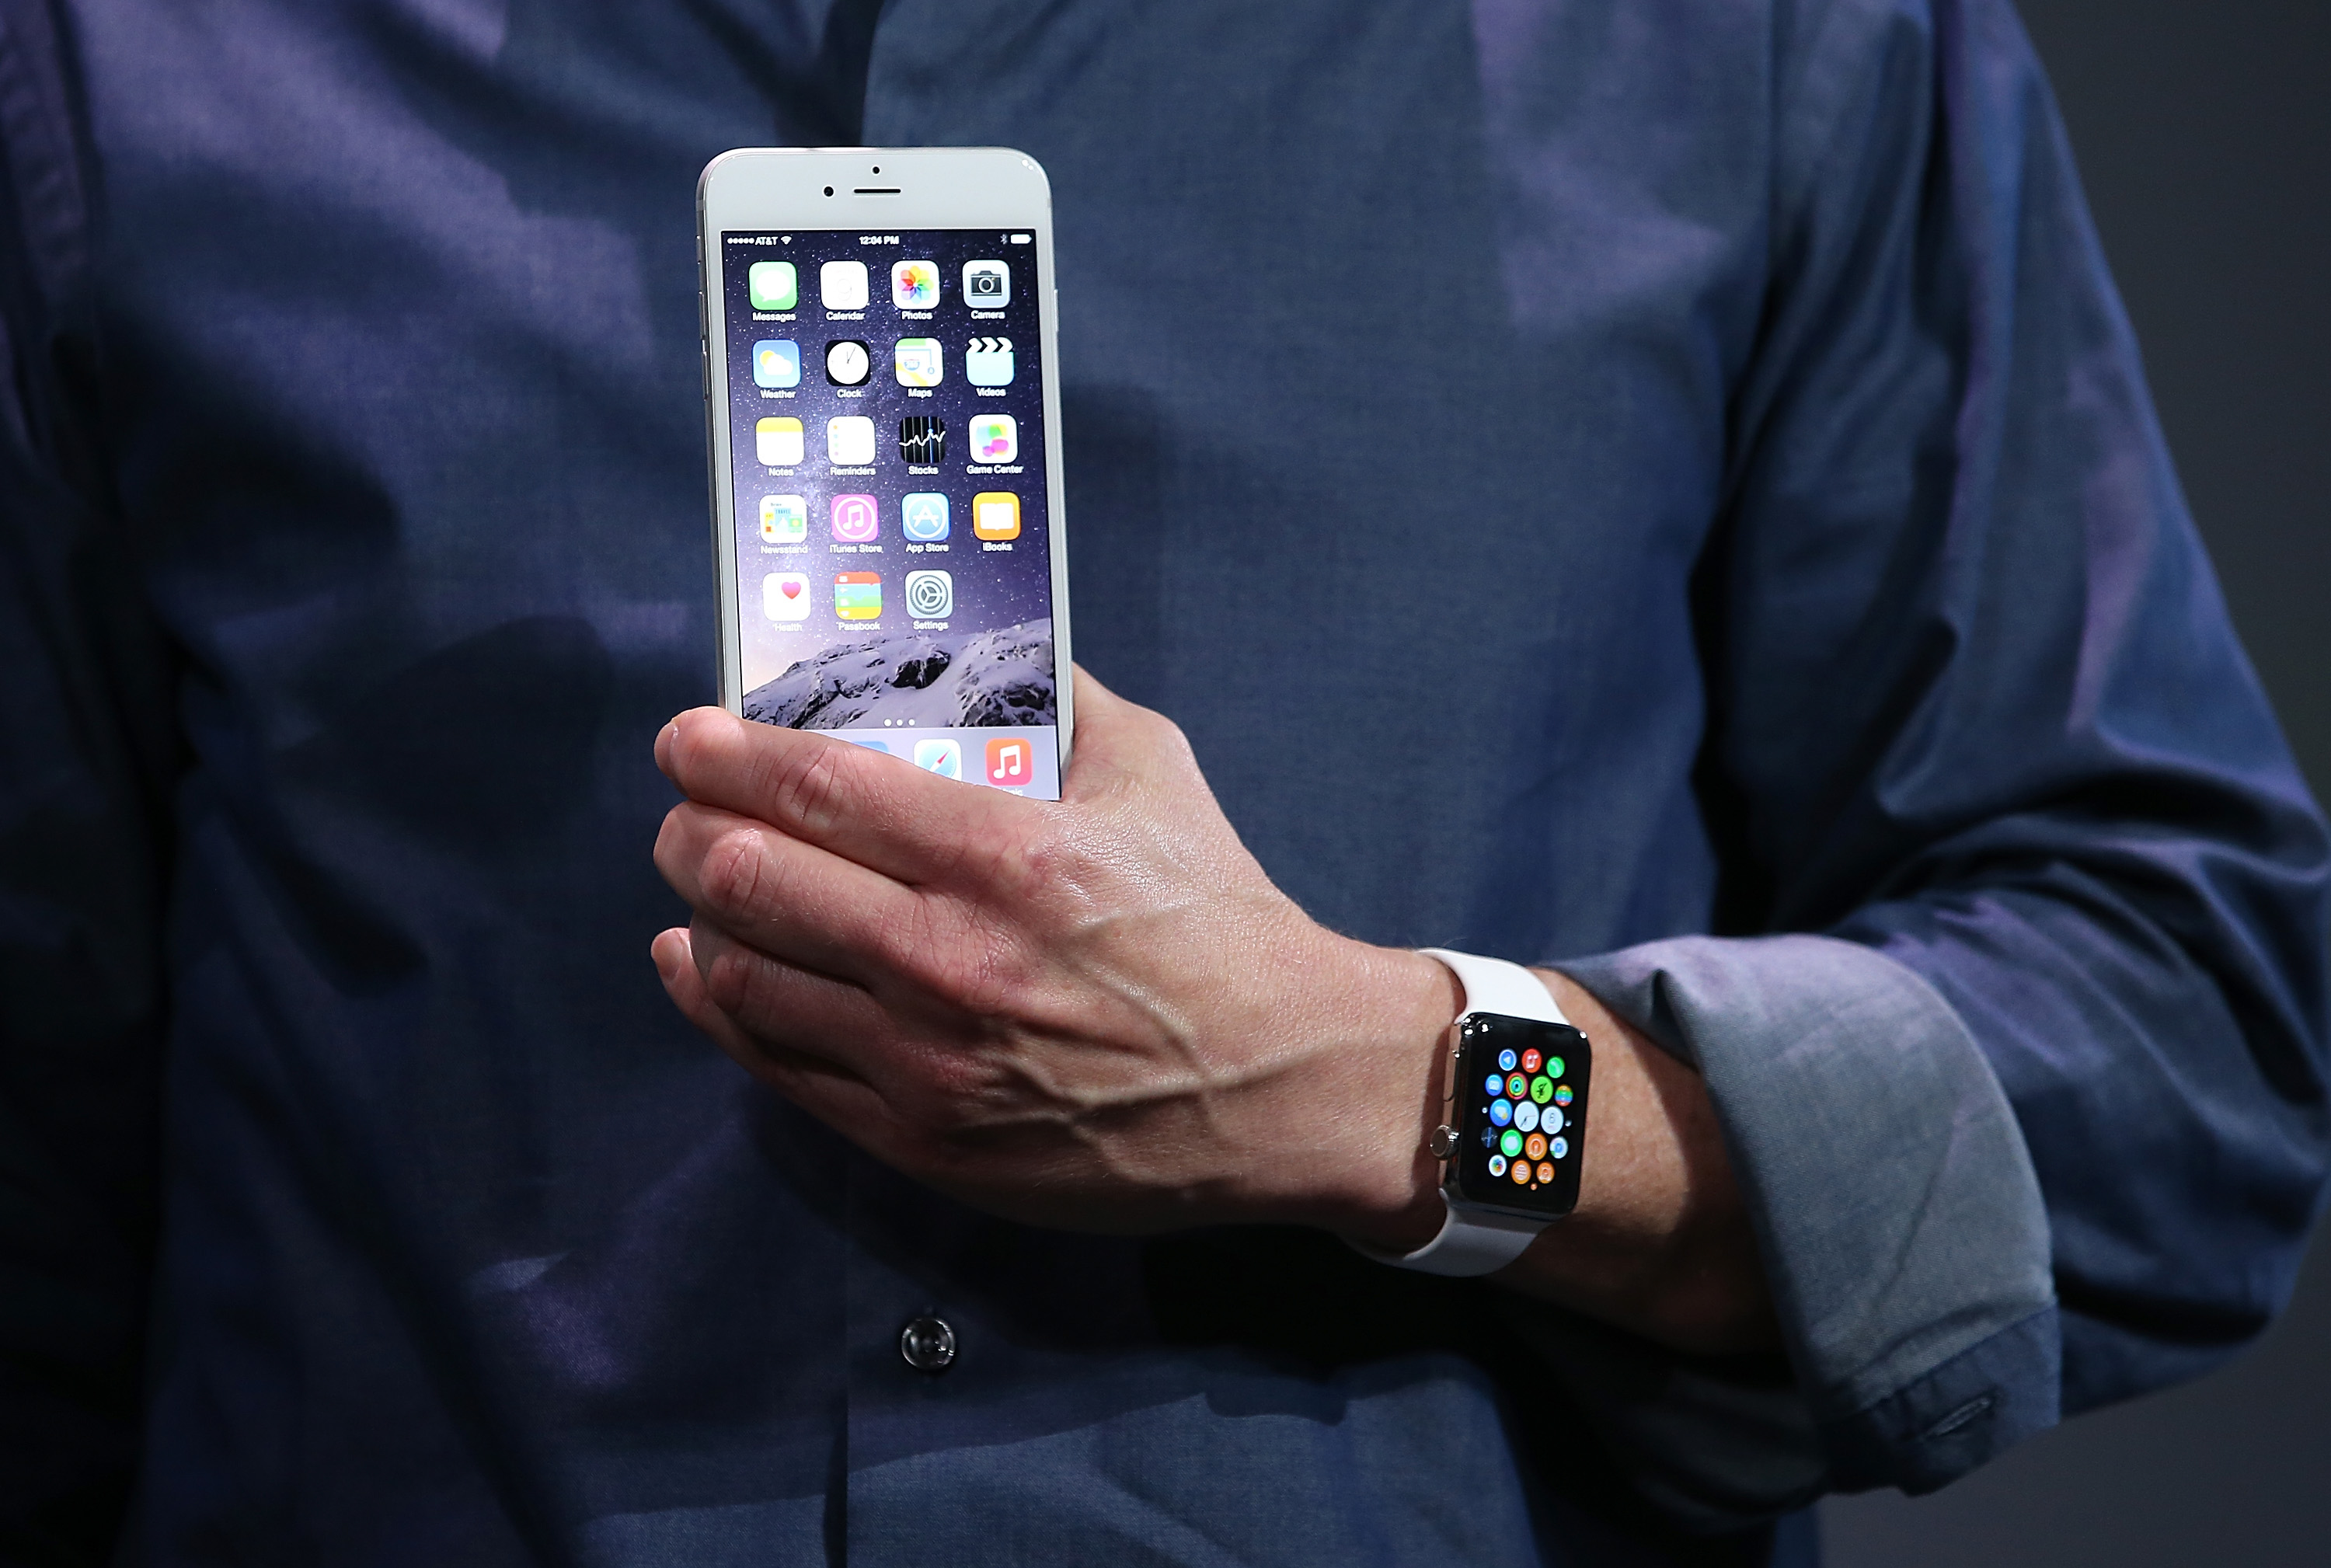 Apple CEO Tim Cook shows off the new iPhone 6 and the Apple Watch during an Apple special event at the Flint Center for the Performing Arts on September 9, 2014 in Cupertino, California. (Justin Sullivan&mdash;Getty Images)